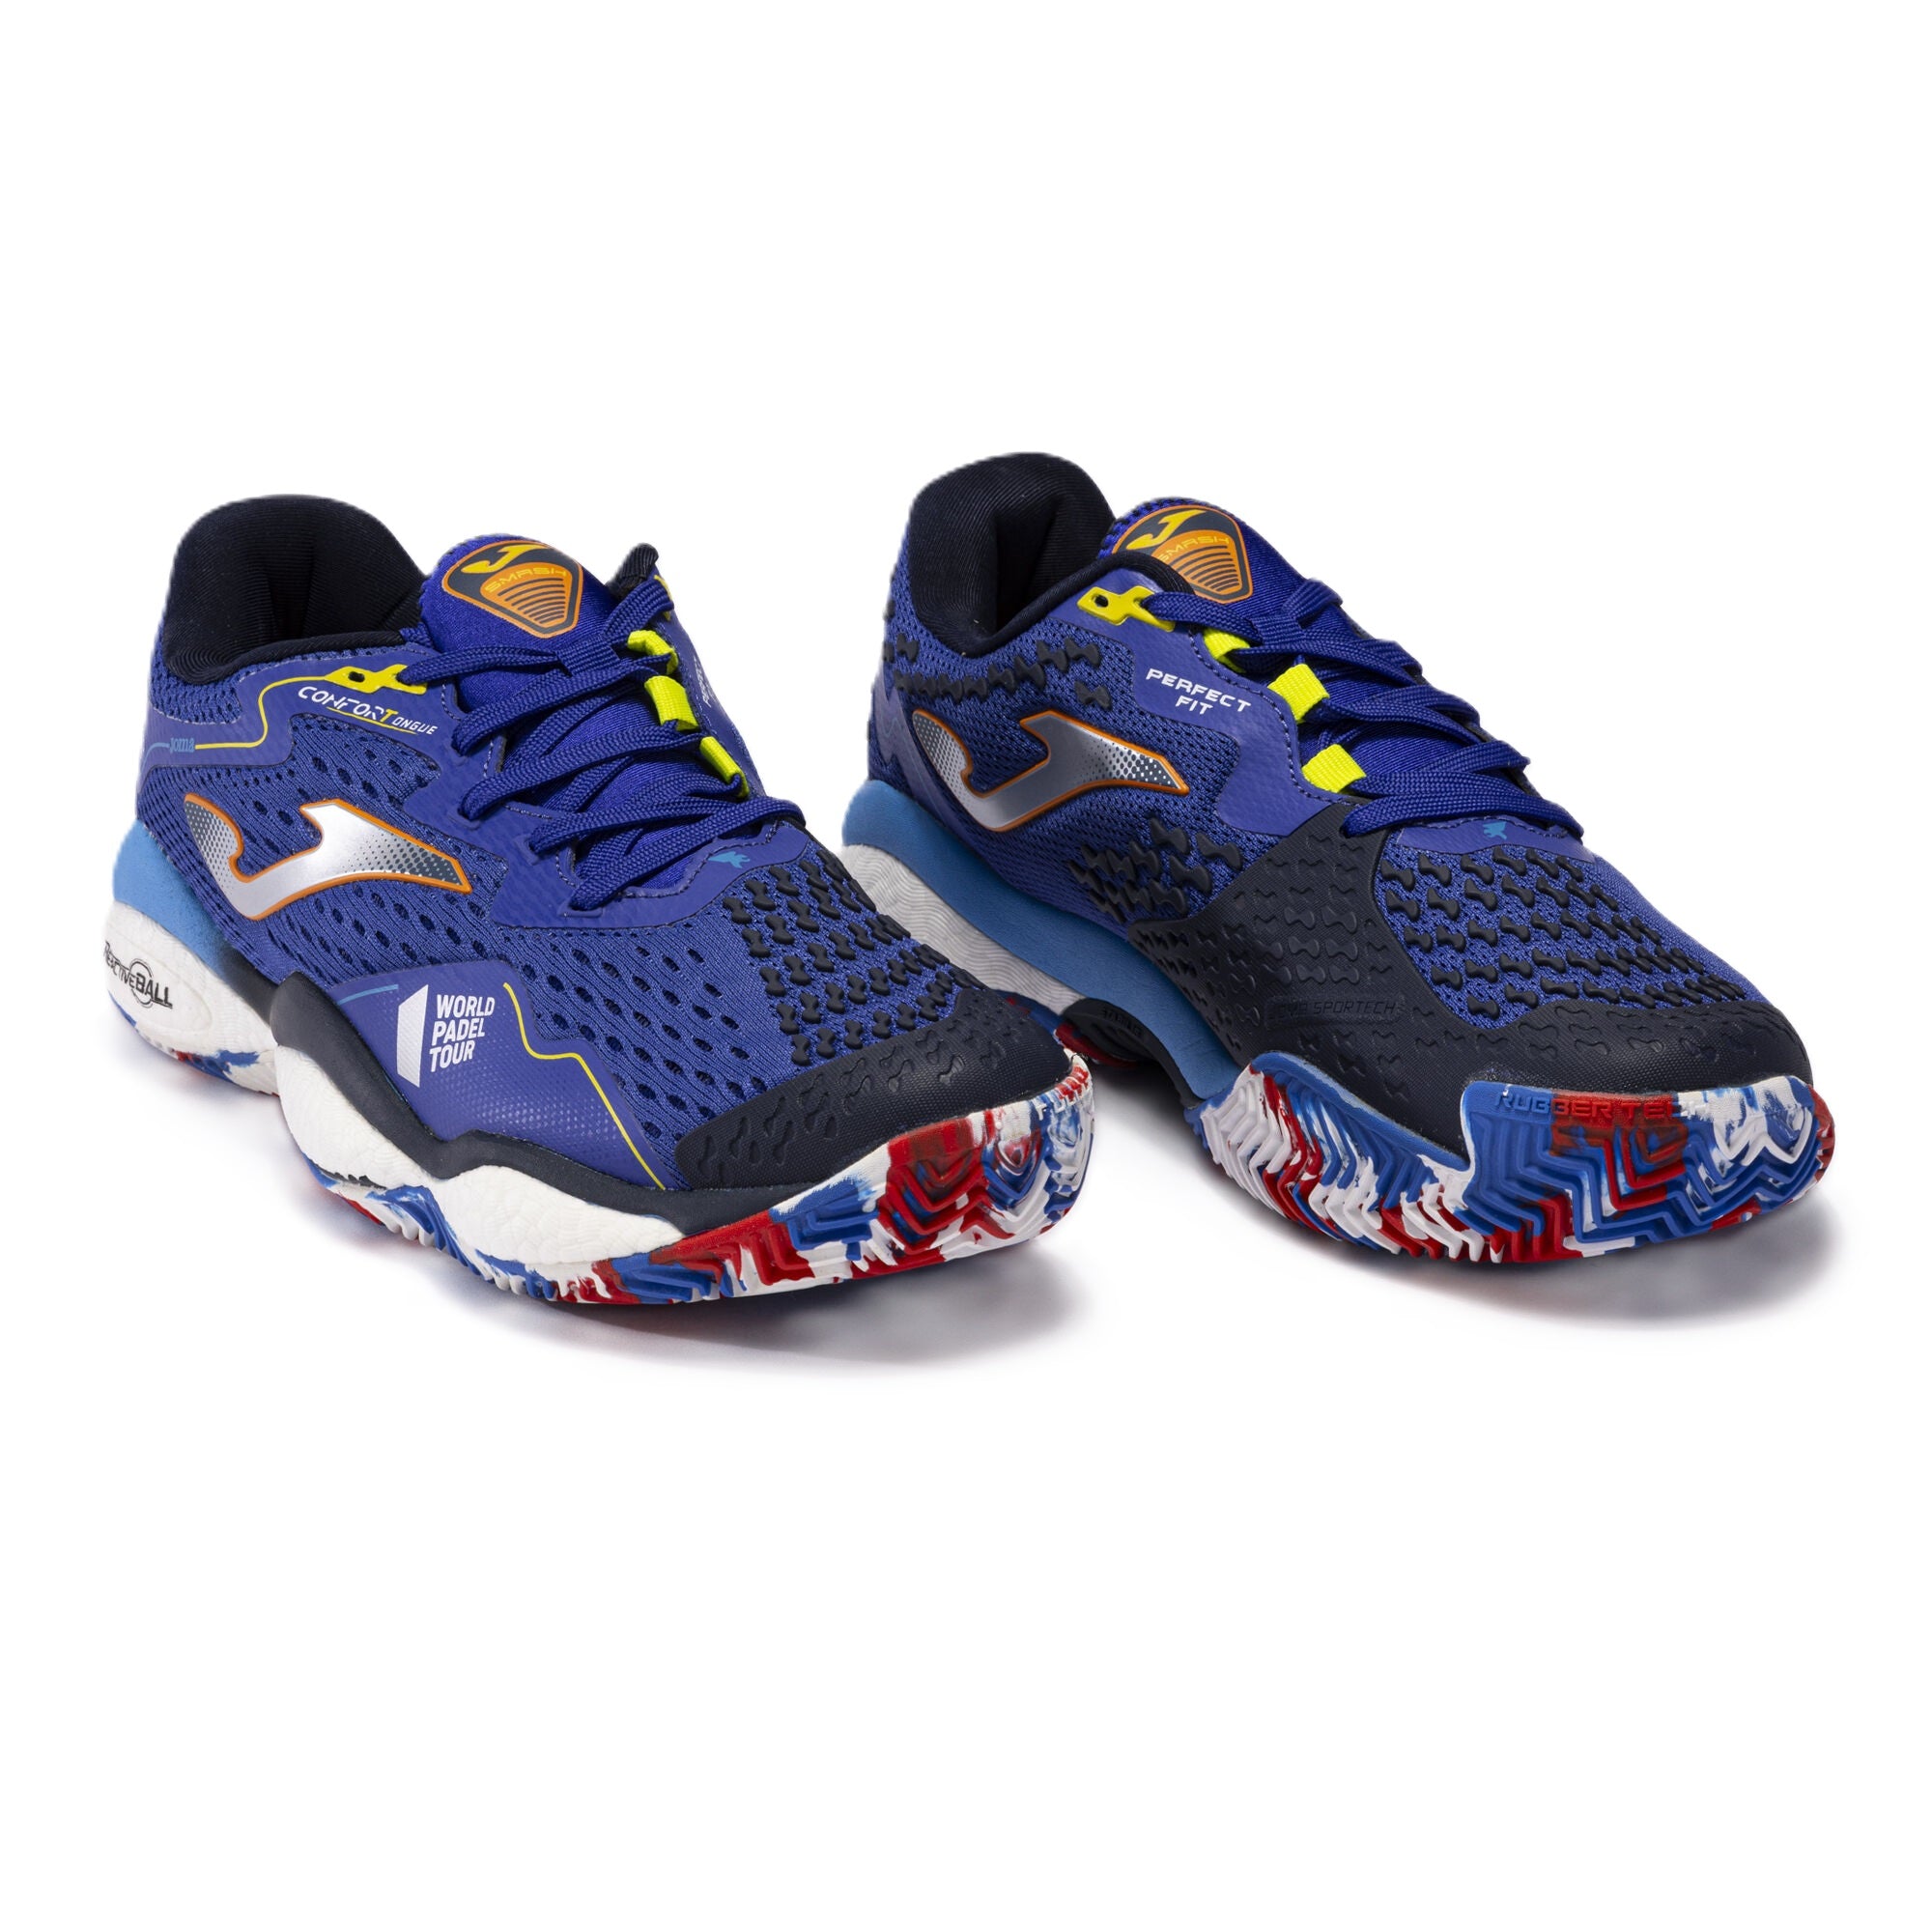 Joma Padel Shoes for Men Slam Clay, World Padel Tour – Comfortable, Light  for Training and Competition